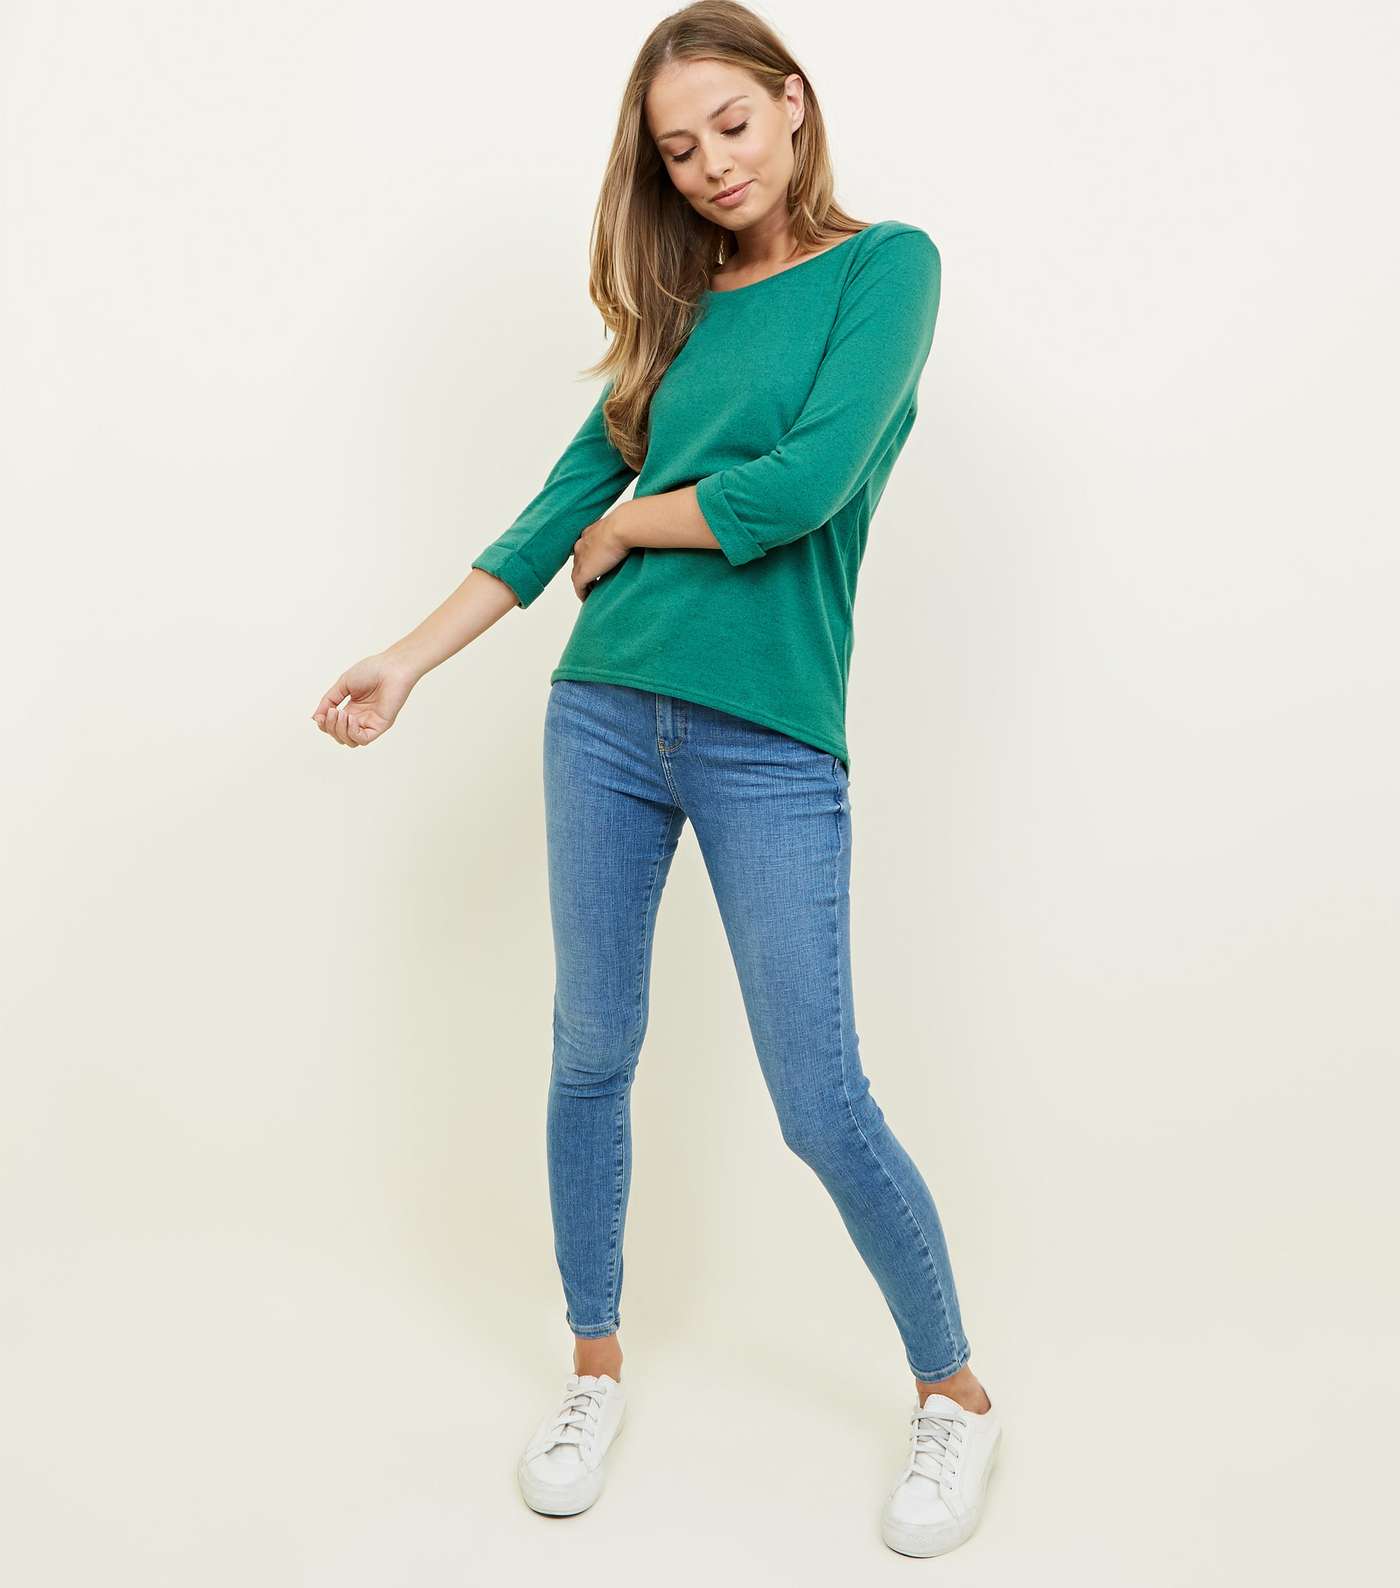 Green 3/4 Sleeve Fine Knit Top Image 2